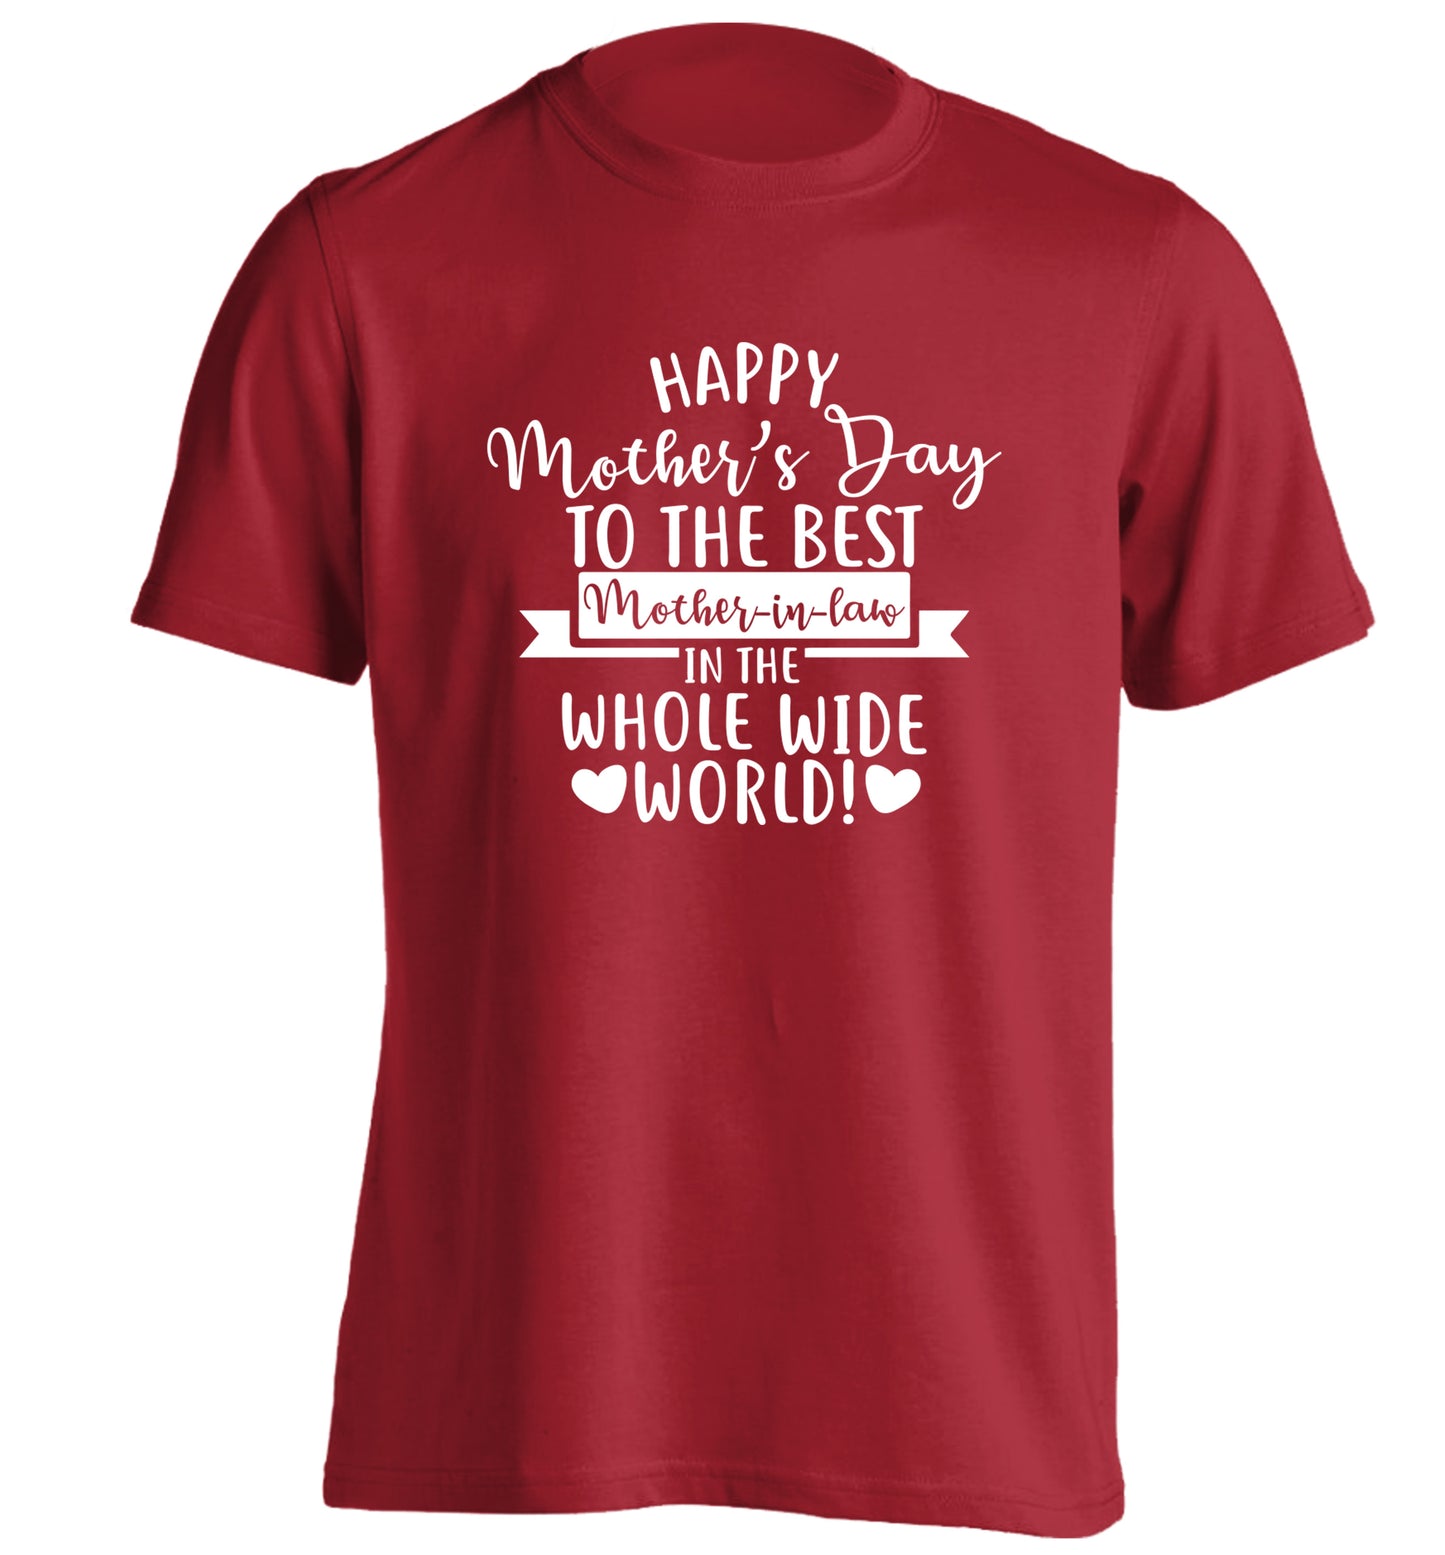 Happy mother's day to the best mother-in-law in the world adults unisex red Tshirt 2XL